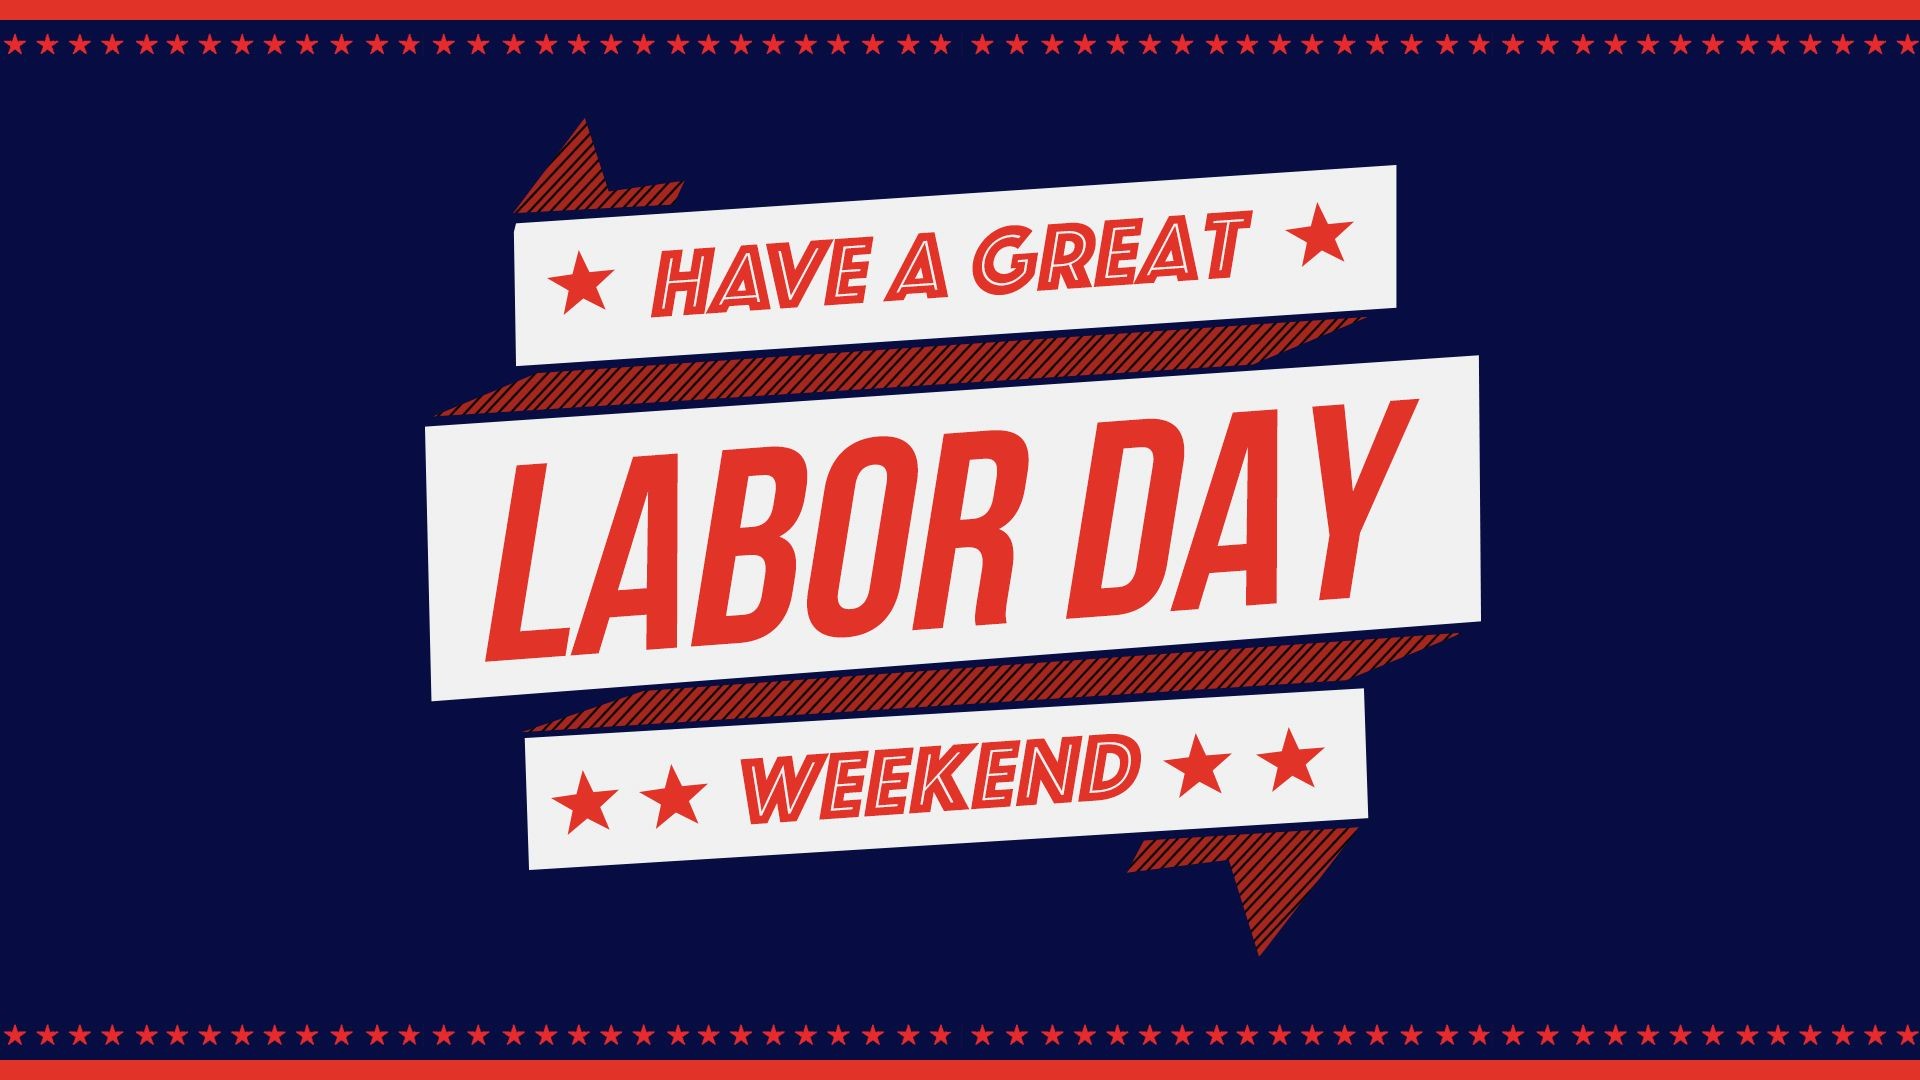 Labor Day Images Free - wallpaper hd 1920x1080.